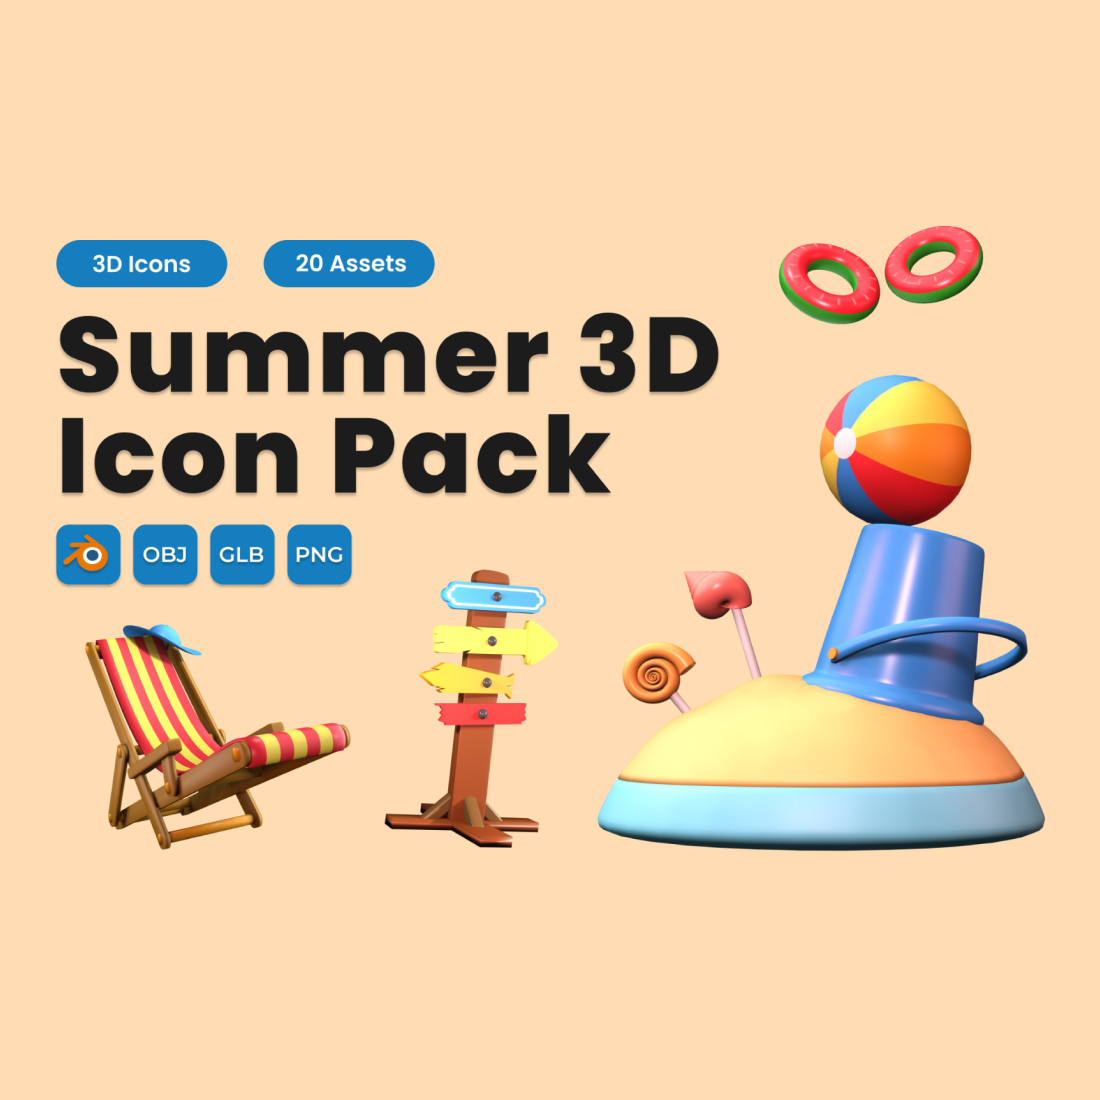 Summer 3D Icon Pack Vol 4 cover image.